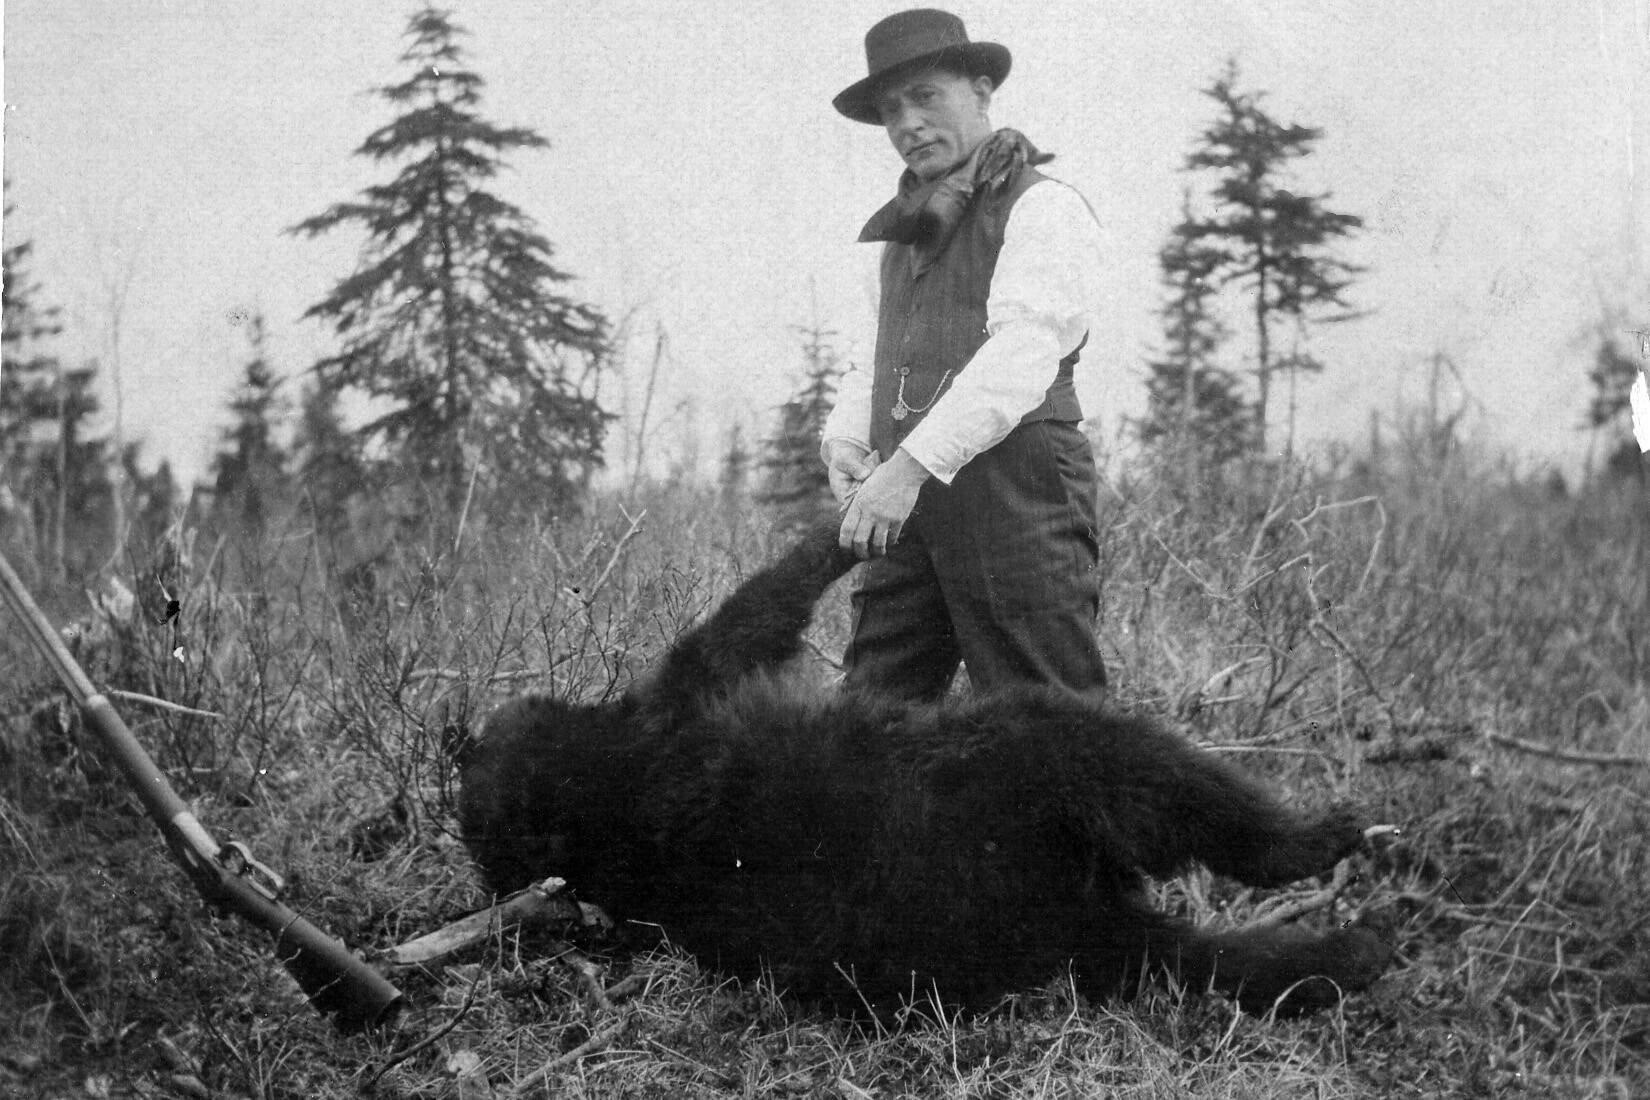 Frenchy Vian, who posed for many photographs of himself, was acknowledged as a skilled hunter. (Photo courtesy of the Viani Family Collection)